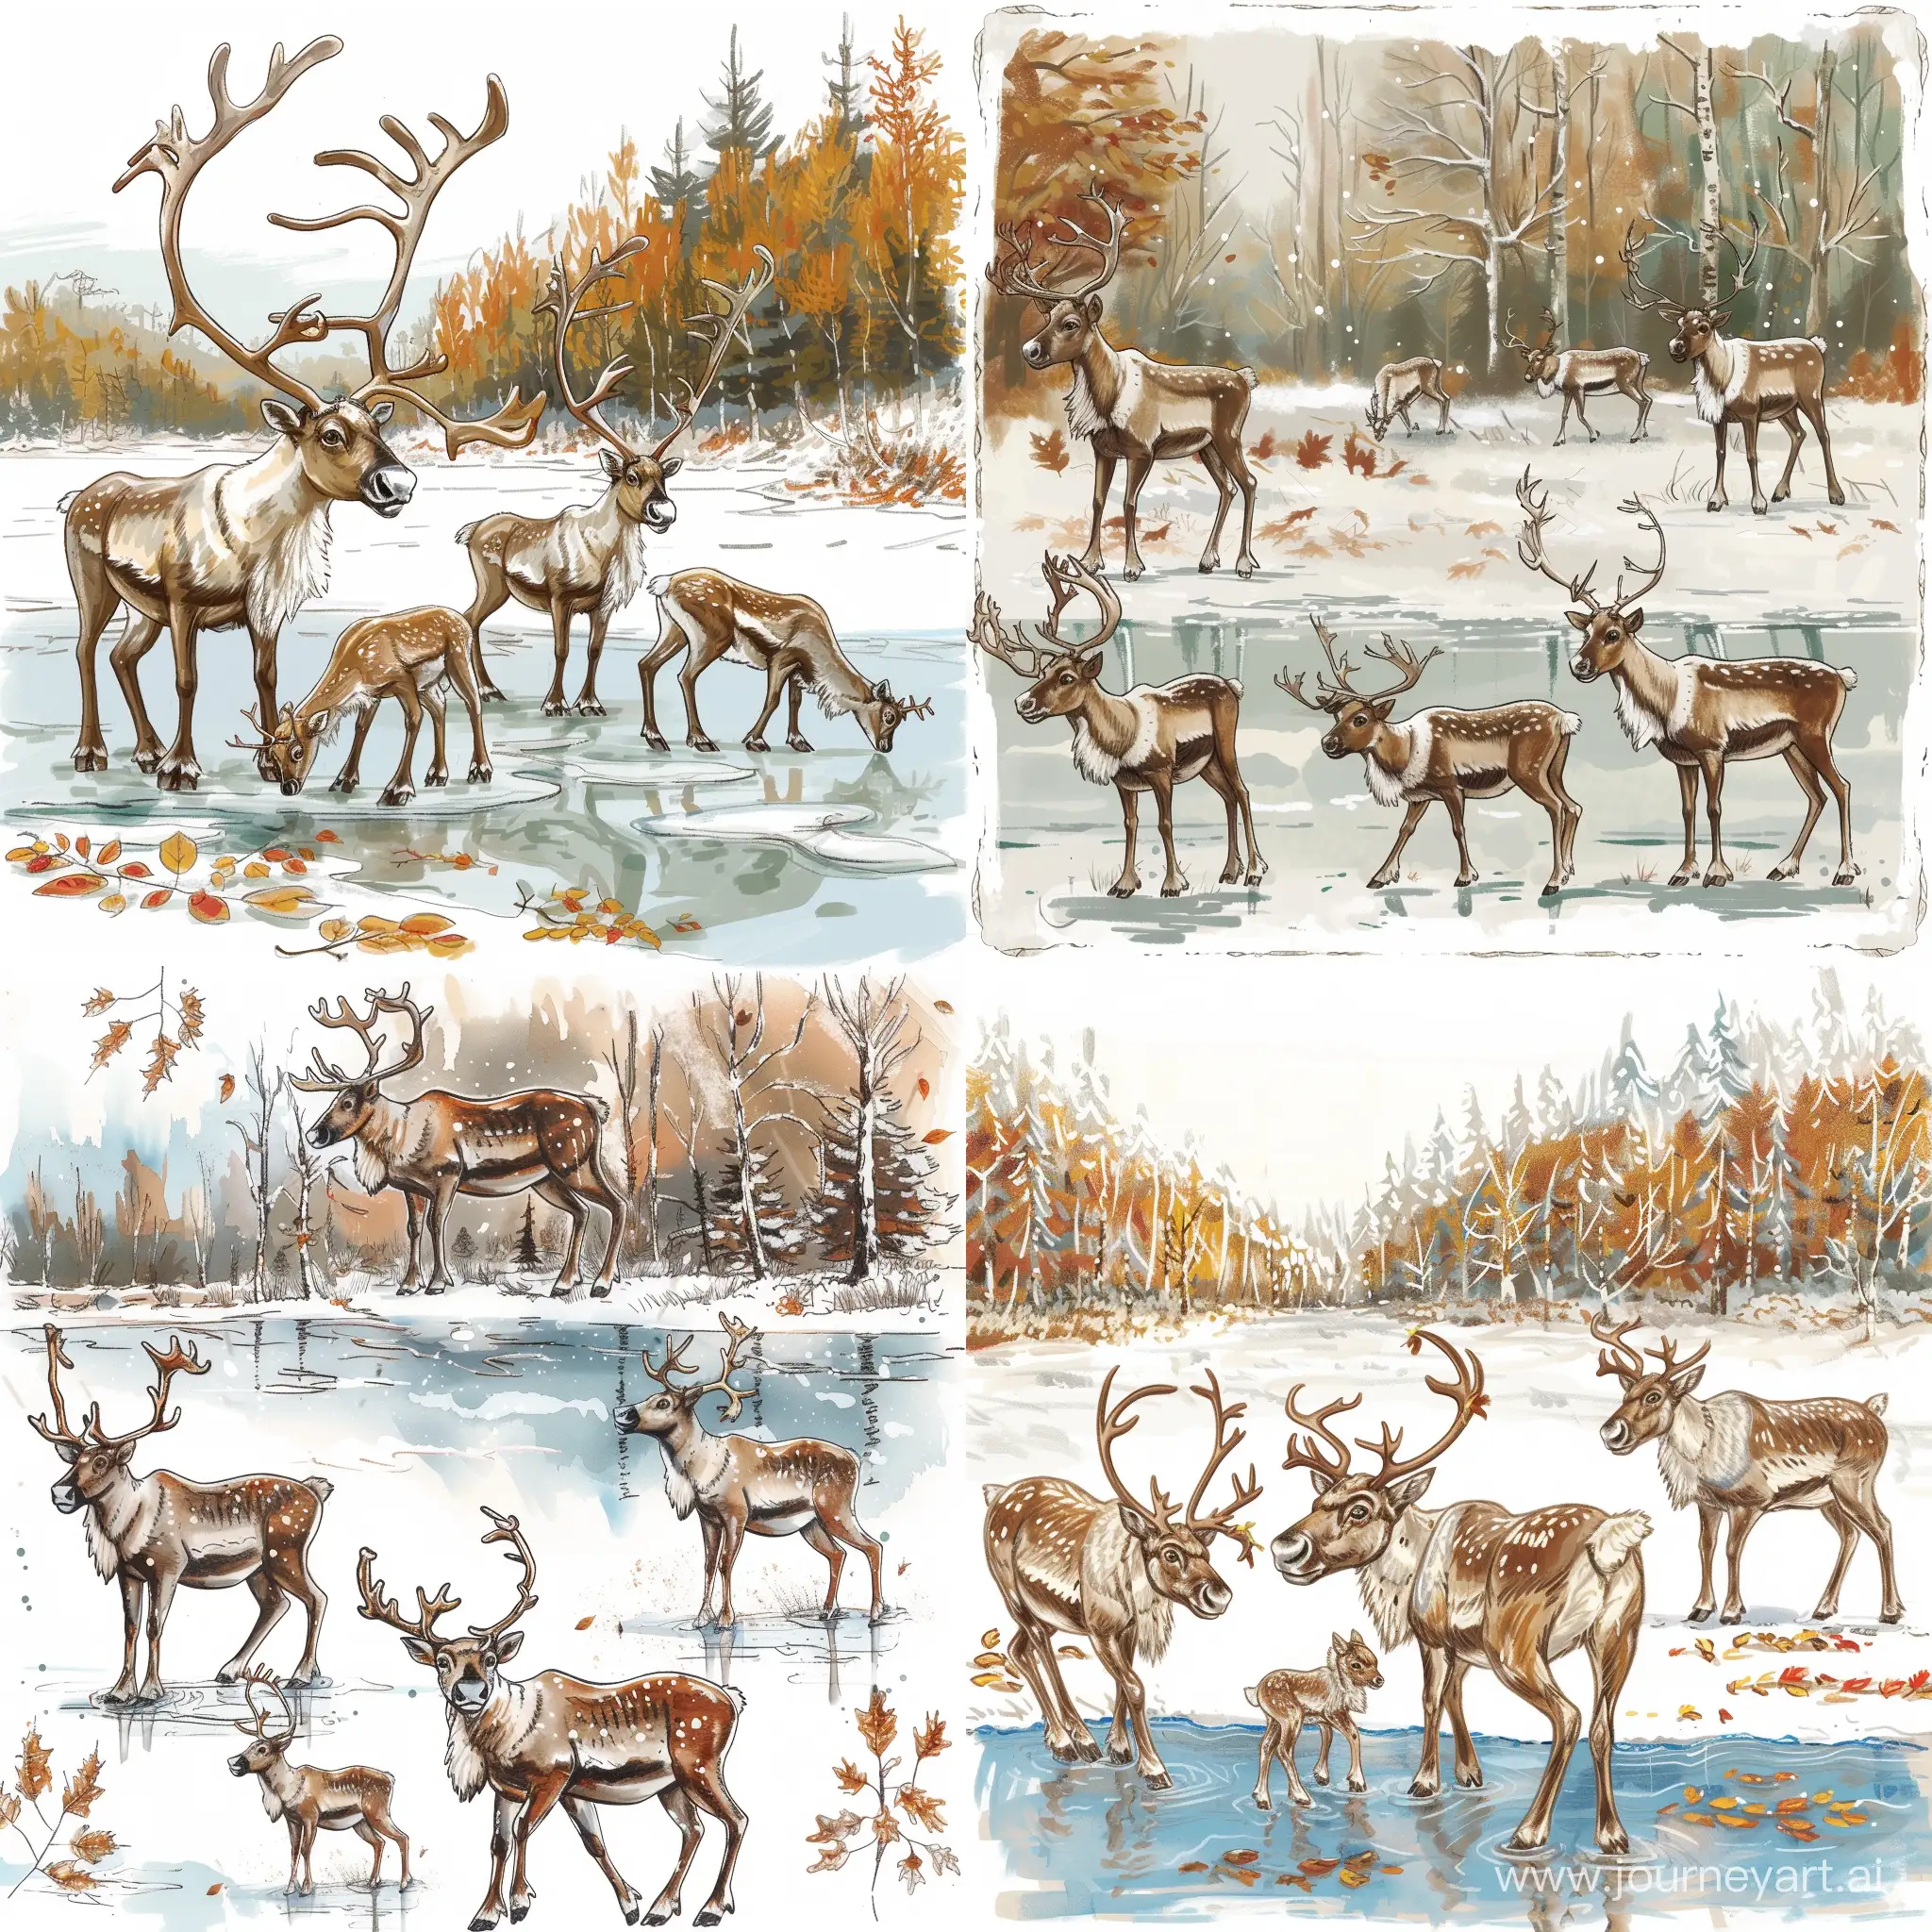 Draw five reindeer and two fawns in different poses in sketchbook sketch style, quick sketch stylea lake covered with ice, the first frosts, a snow-covered forest against the background, autumn leaves are visible, but the first snow fell, the ice on the lake is transparent, 2D drawing style